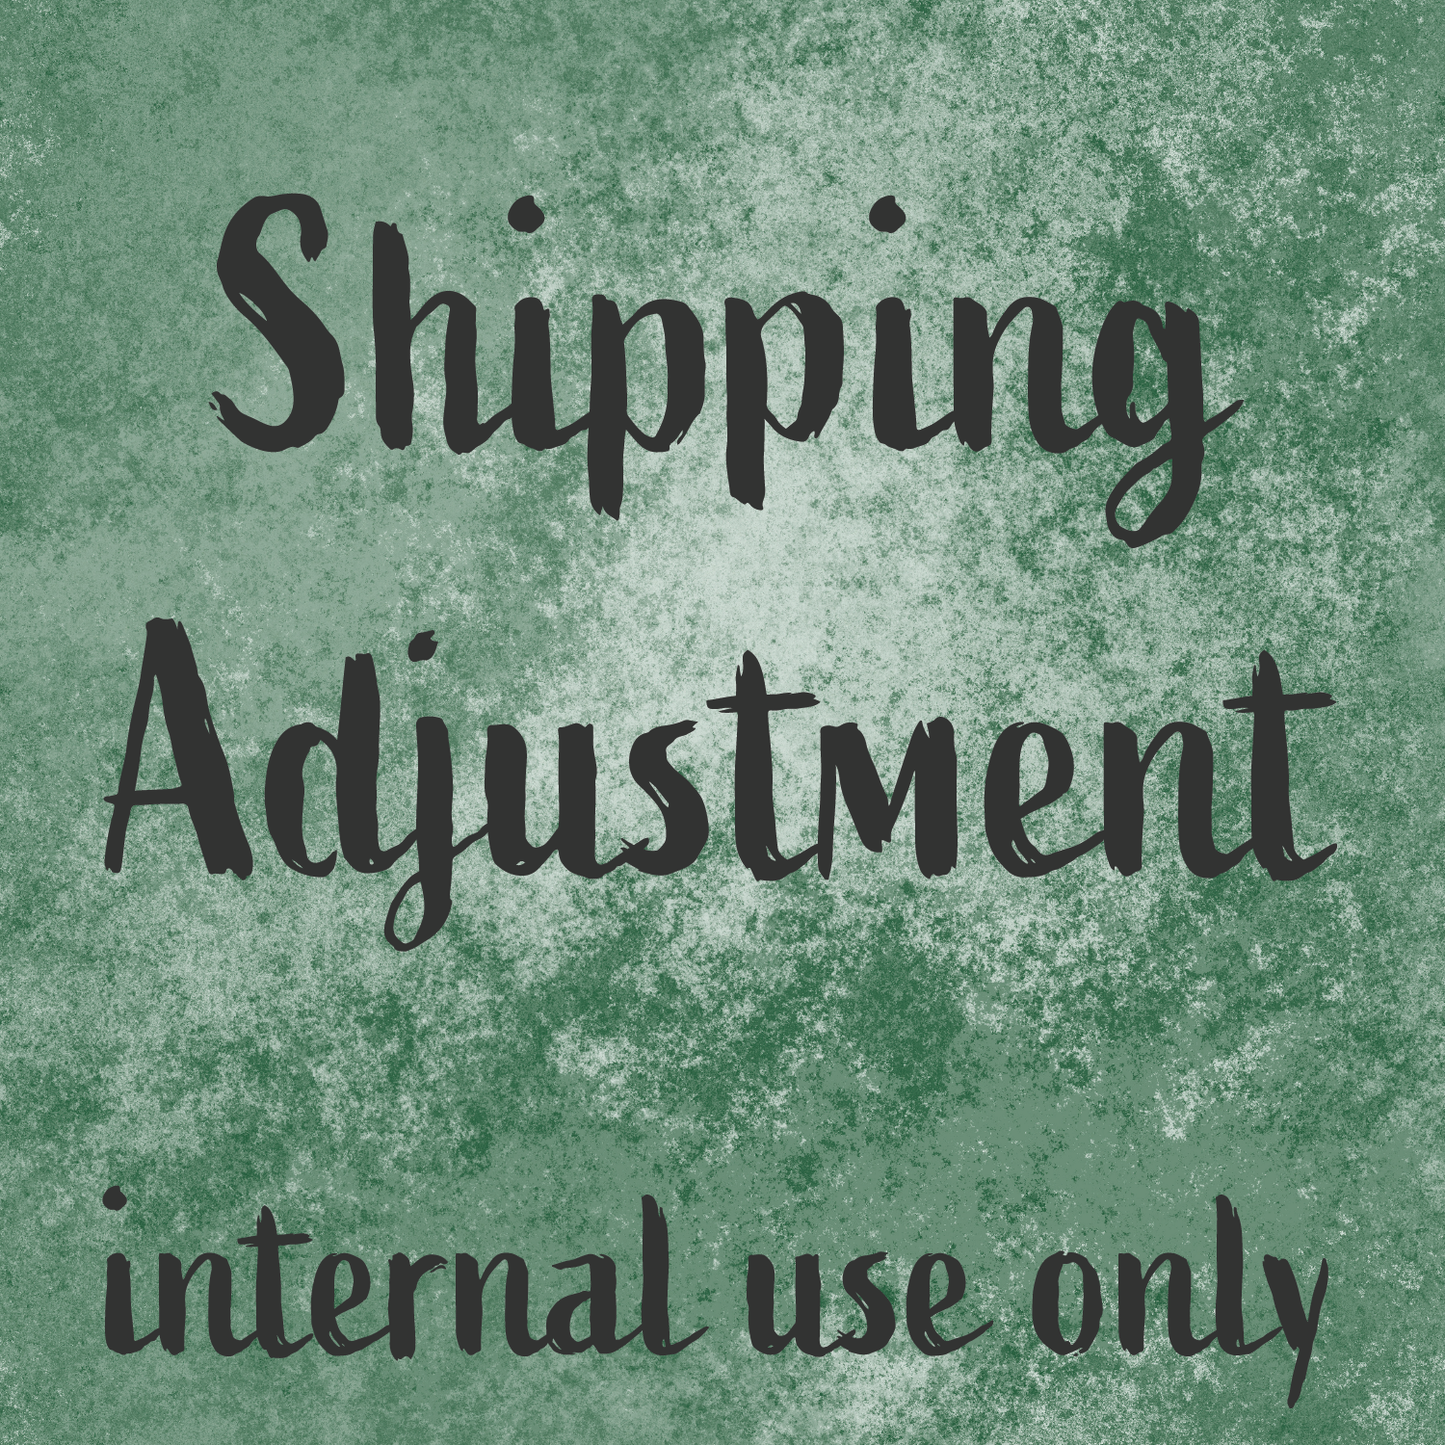 Shipping Adjustment ***INTERNAL USE ONLY***